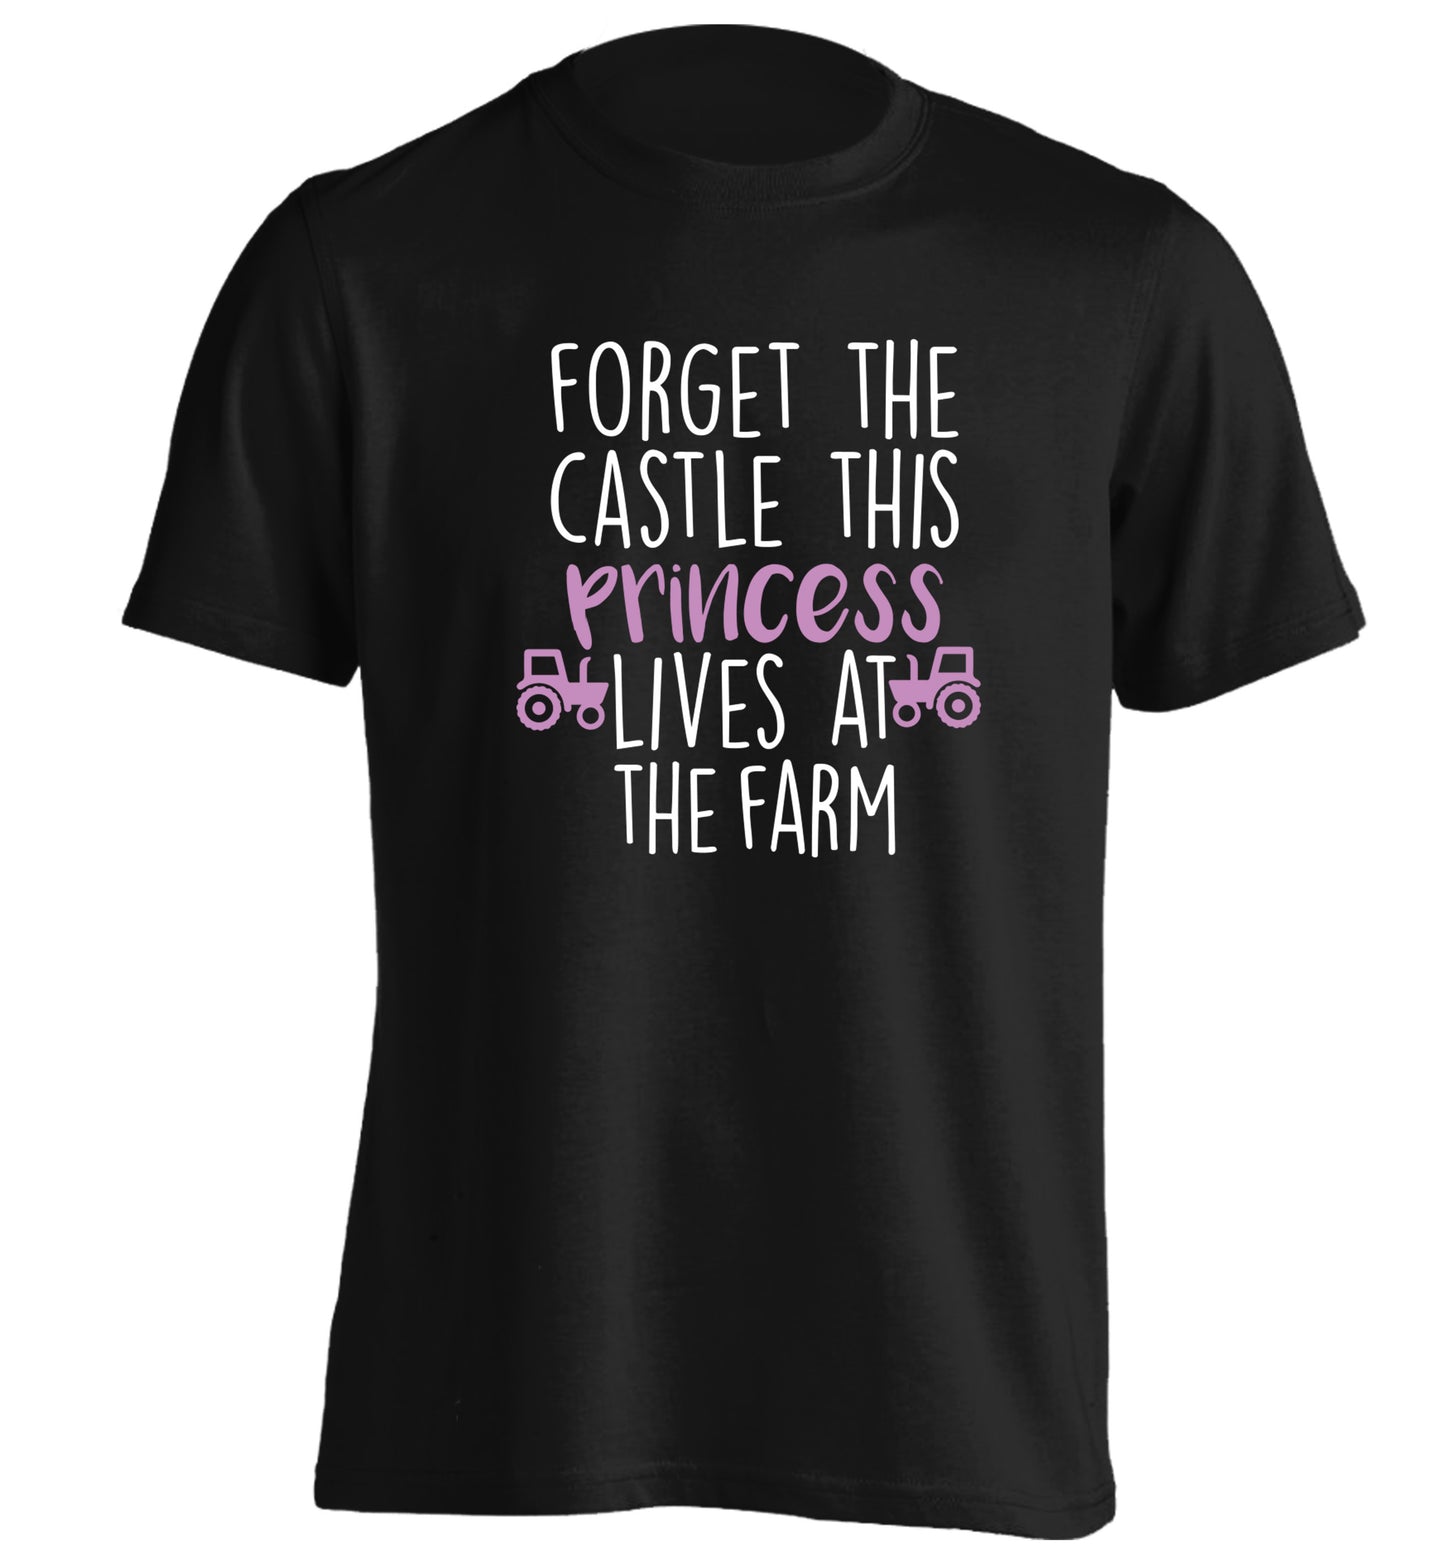 Forget the castle this princess lives at the farm adults unisex black Tshirt 2XL